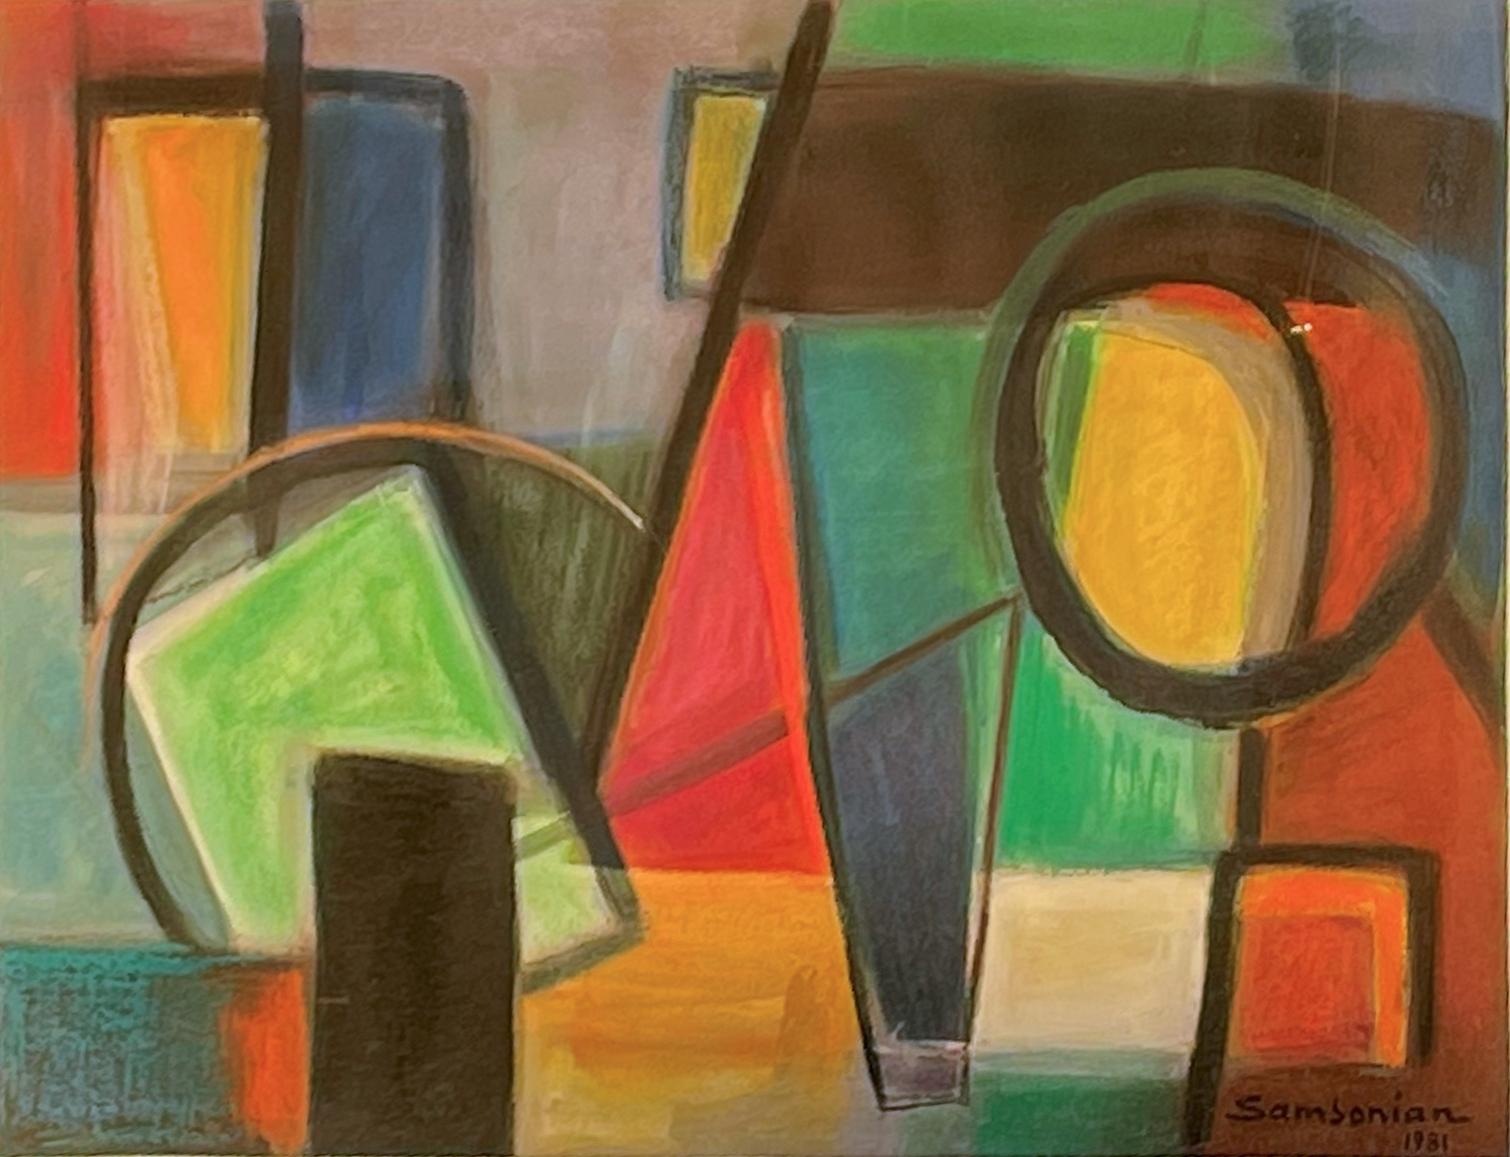 Simon Samsonian (1912 - 2003)
Colorful Geometric Abstraction, 1981
Oil on paper
16 x 22 inches
Signed and dated lower right

Provenance:
Estate of the artist

This survivor of the Armenian genocide wound up in a Cairo orphanage in 1927. He rose to